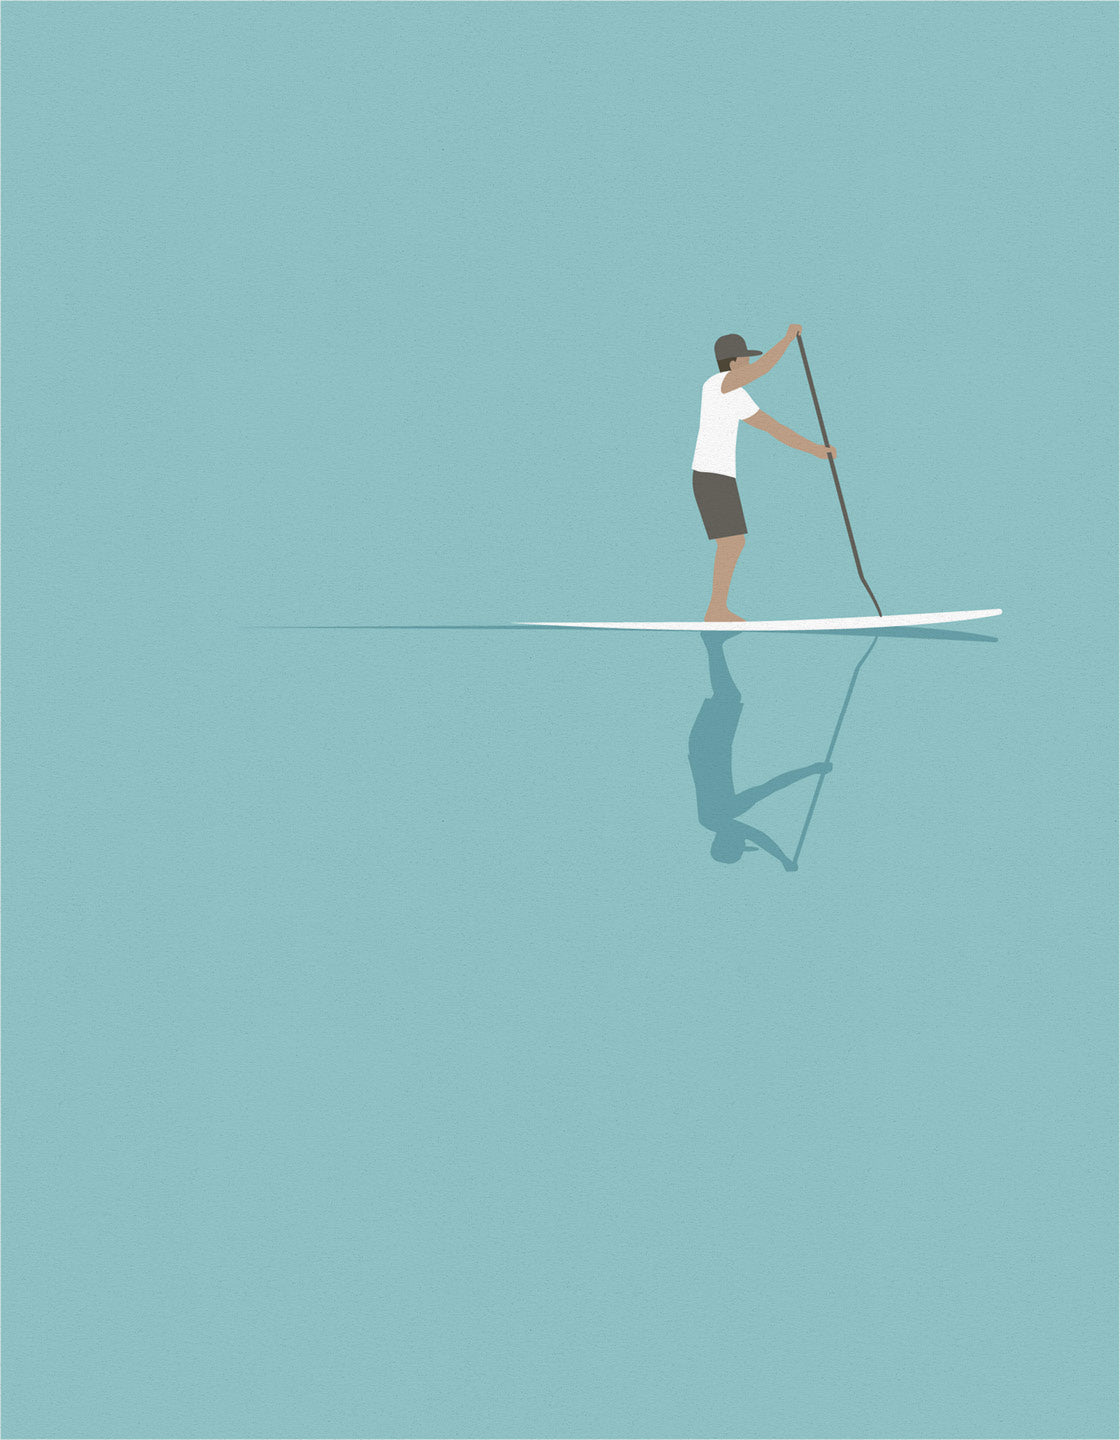 Stand up paddleboarder